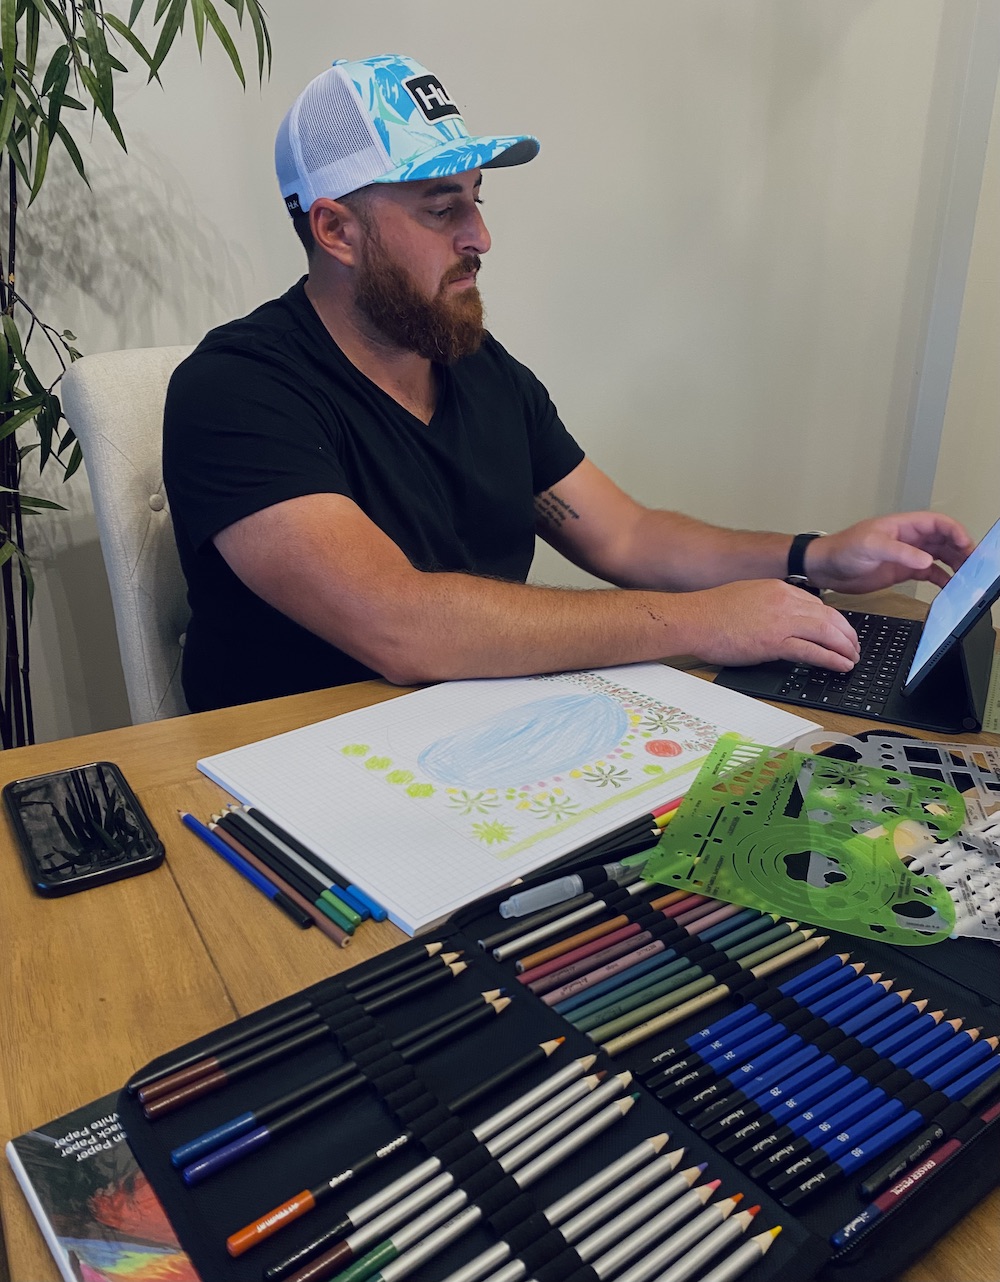 Chris intently working on a computer, digitally rendering a landscape design with intricate details, showing a mix of plants, hardscapes, and layout features